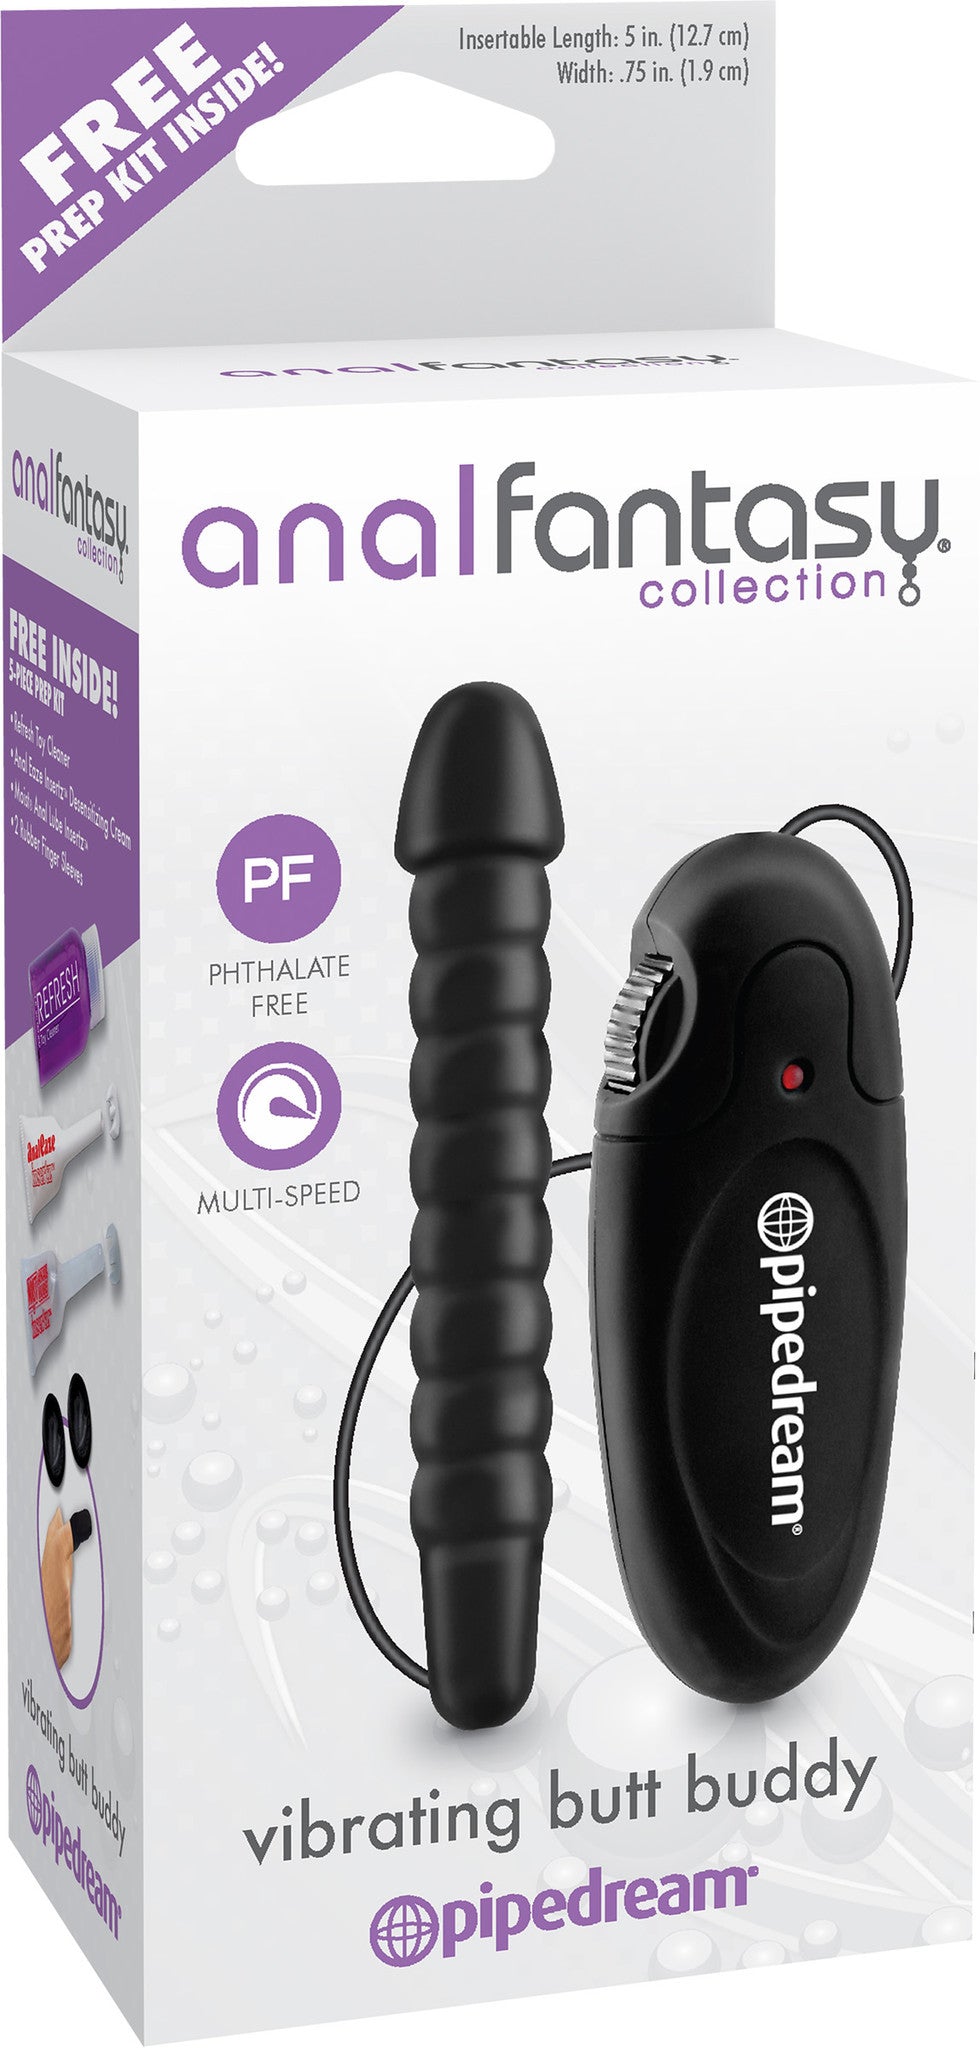 Anal Fantasy Collection Vibrating Butt Buddy  - Club X